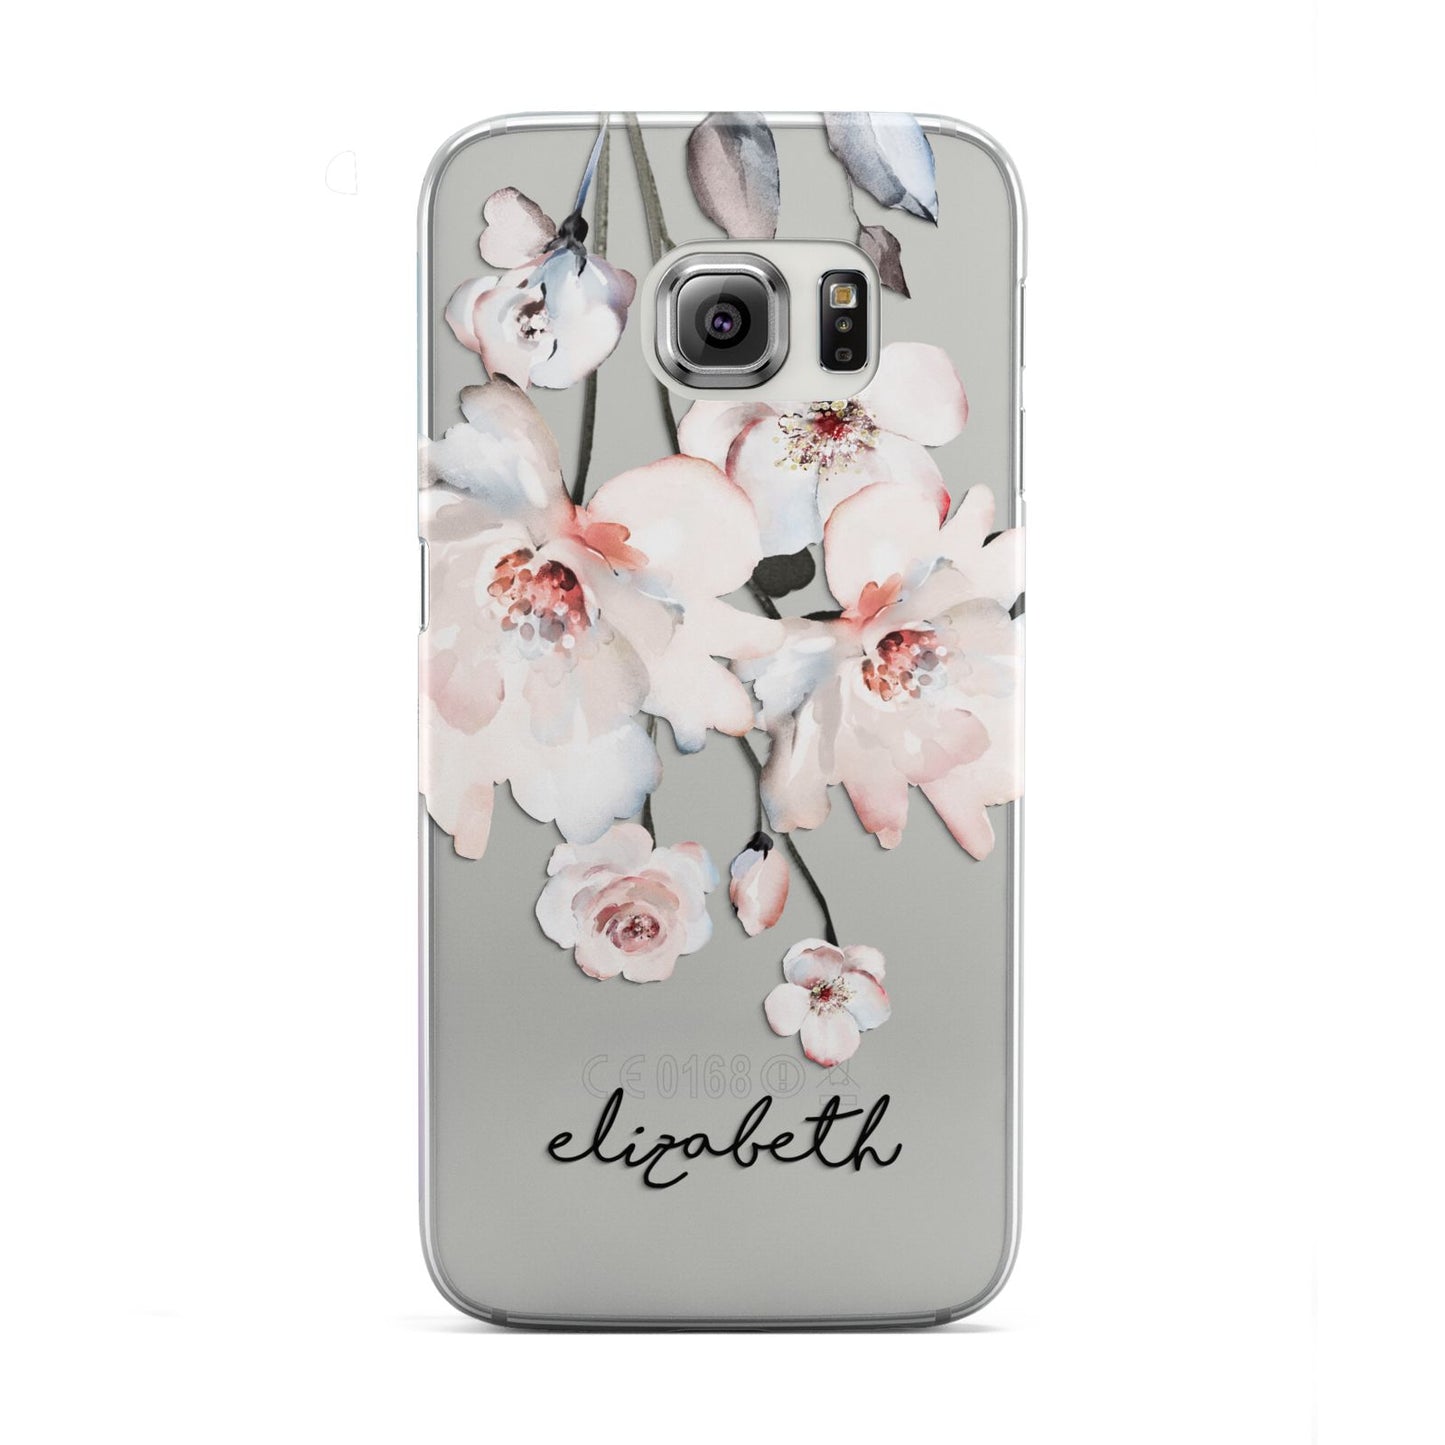 Personalised Name Roses Watercolour Samsung Galaxy S6 Edge Case